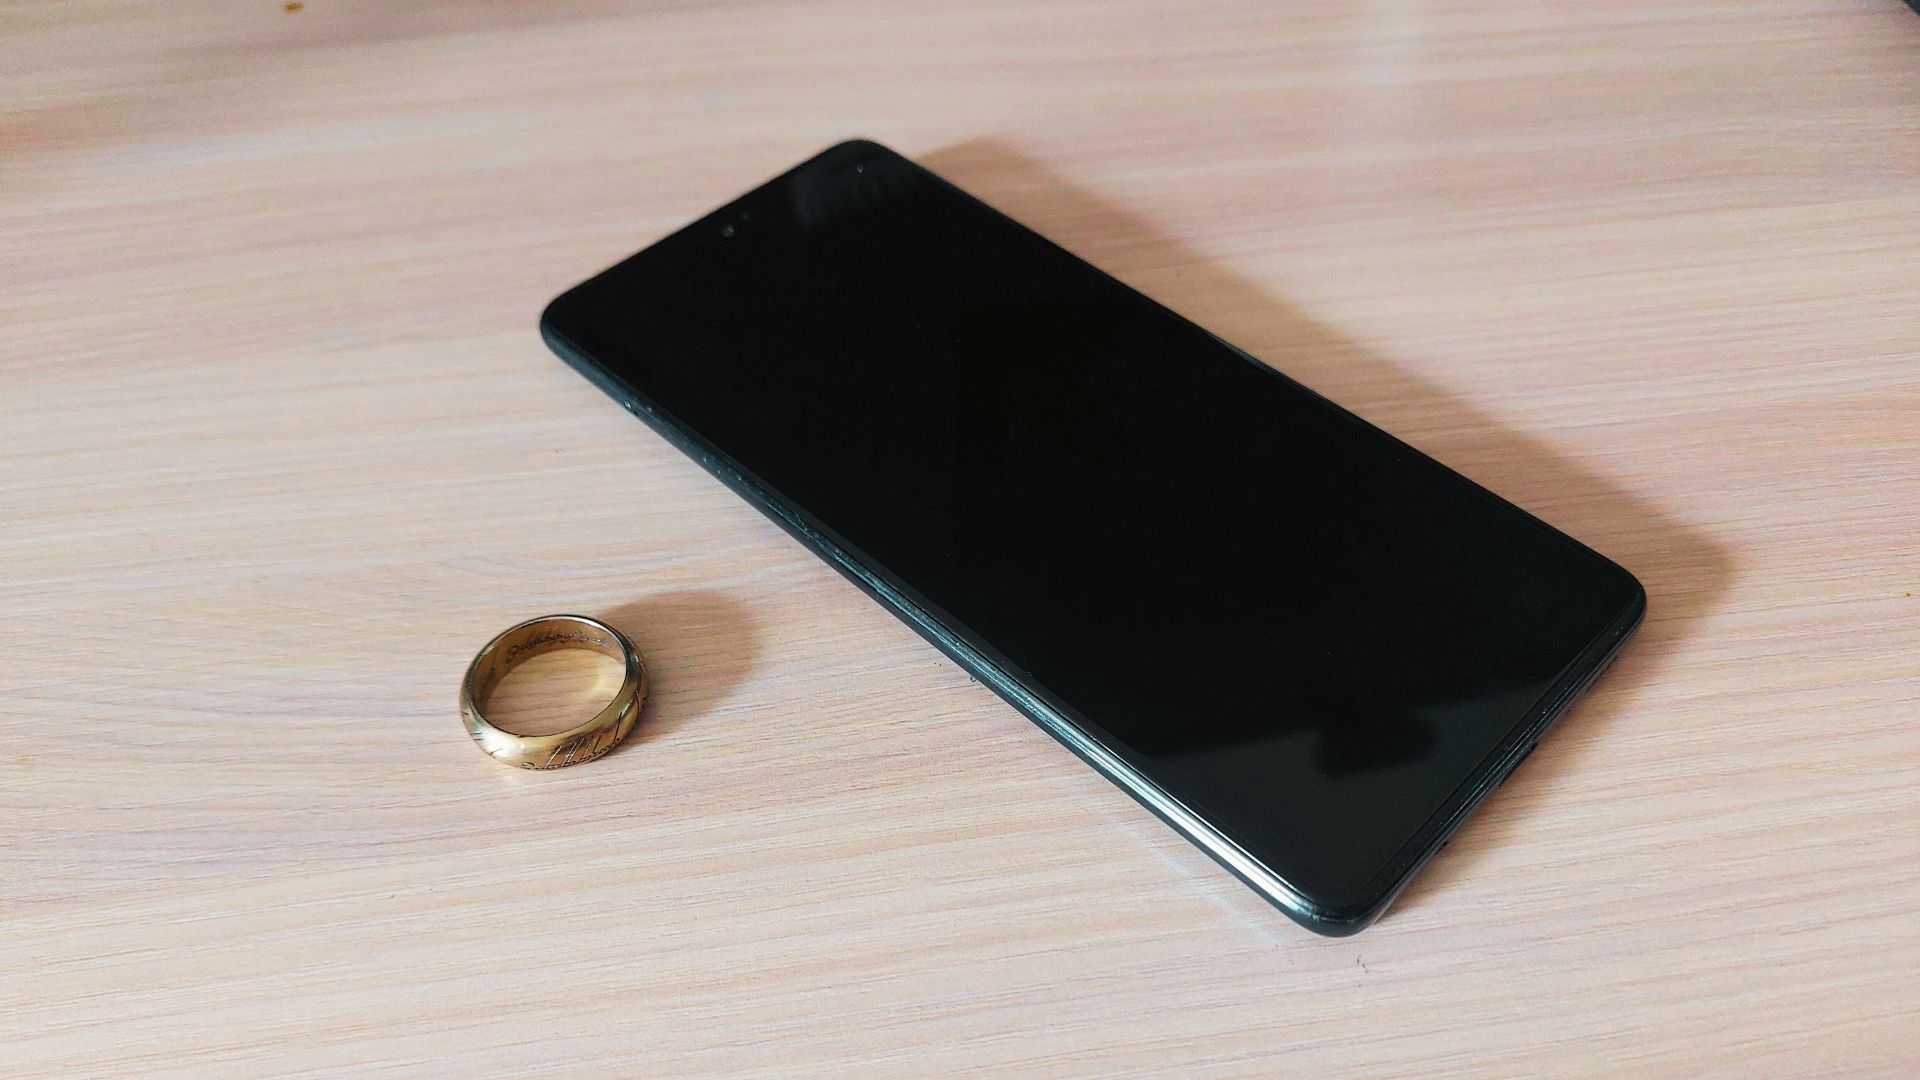 Galaxy Ring's Rumored Features Would Make It an Unbeatable Tracker